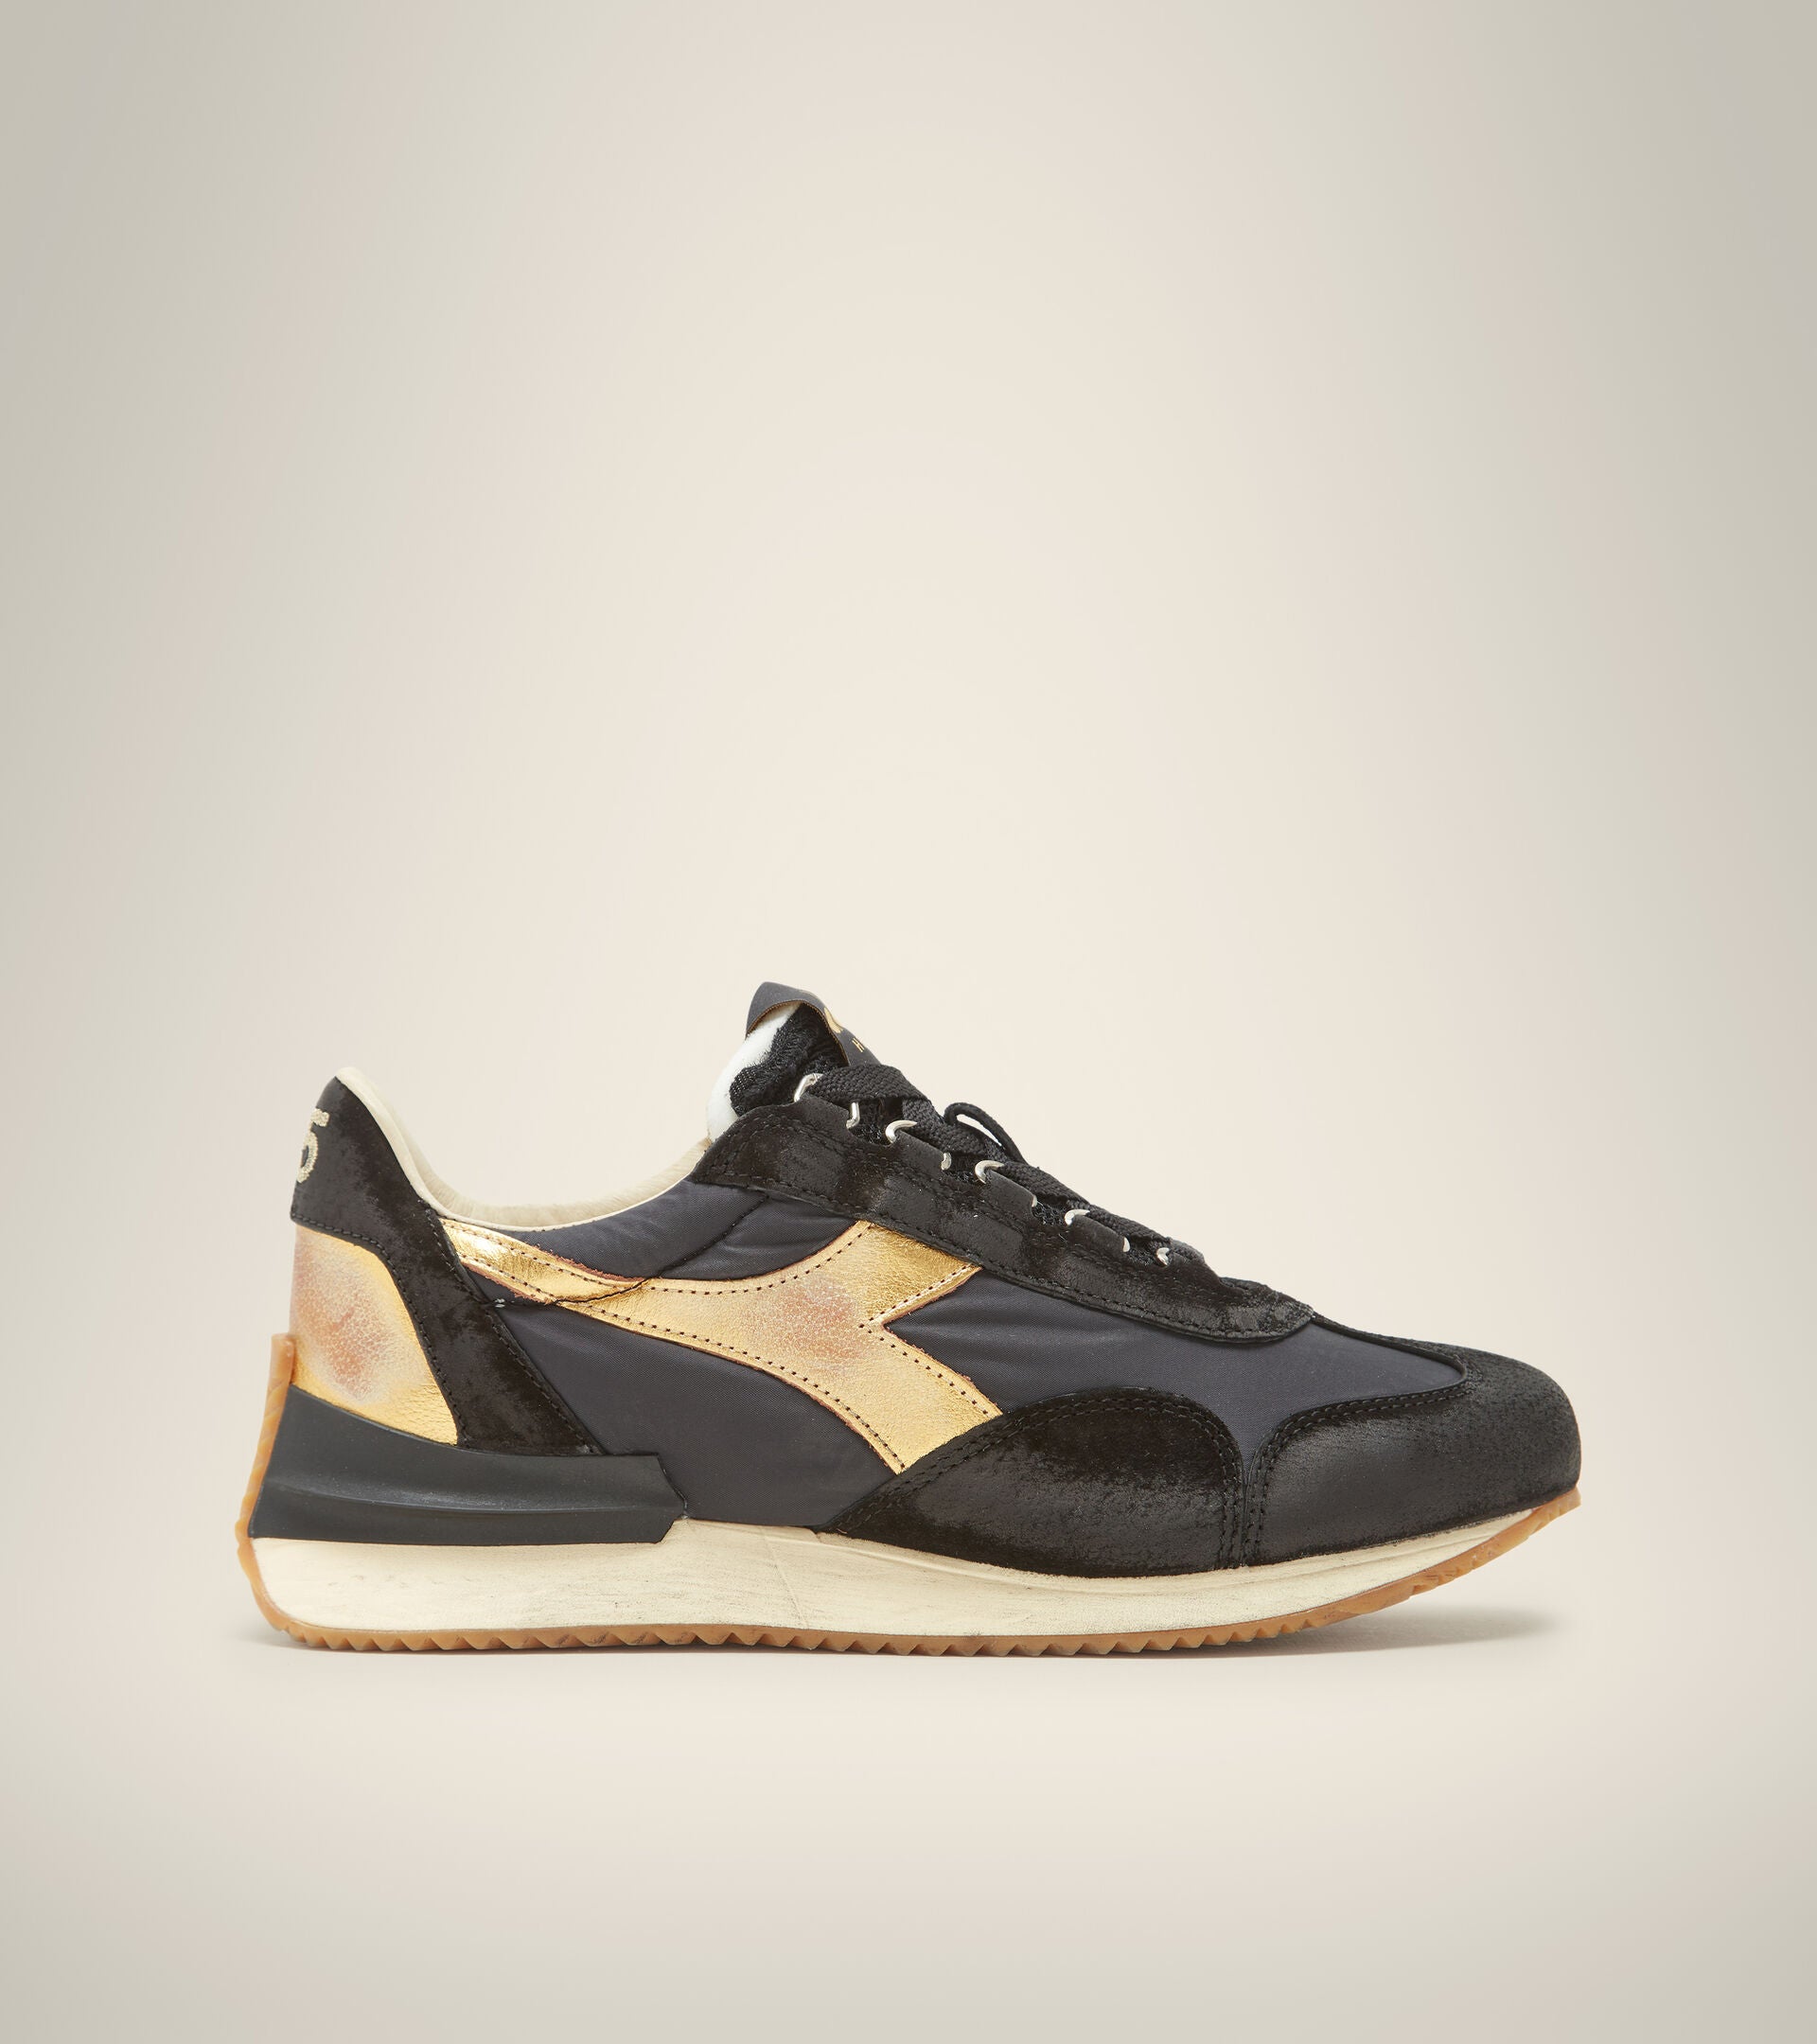 The soft lines and premium materials make these the most elegant trainers from the diadora Heritage line. The Women's Equipe Mad Luna are made from fabric, pigskin, and premium foiled leather, which adds some shine to the diadora fregio and the waxed stonewashed treatment. Wear them day & night to embellish your favourite outfits.